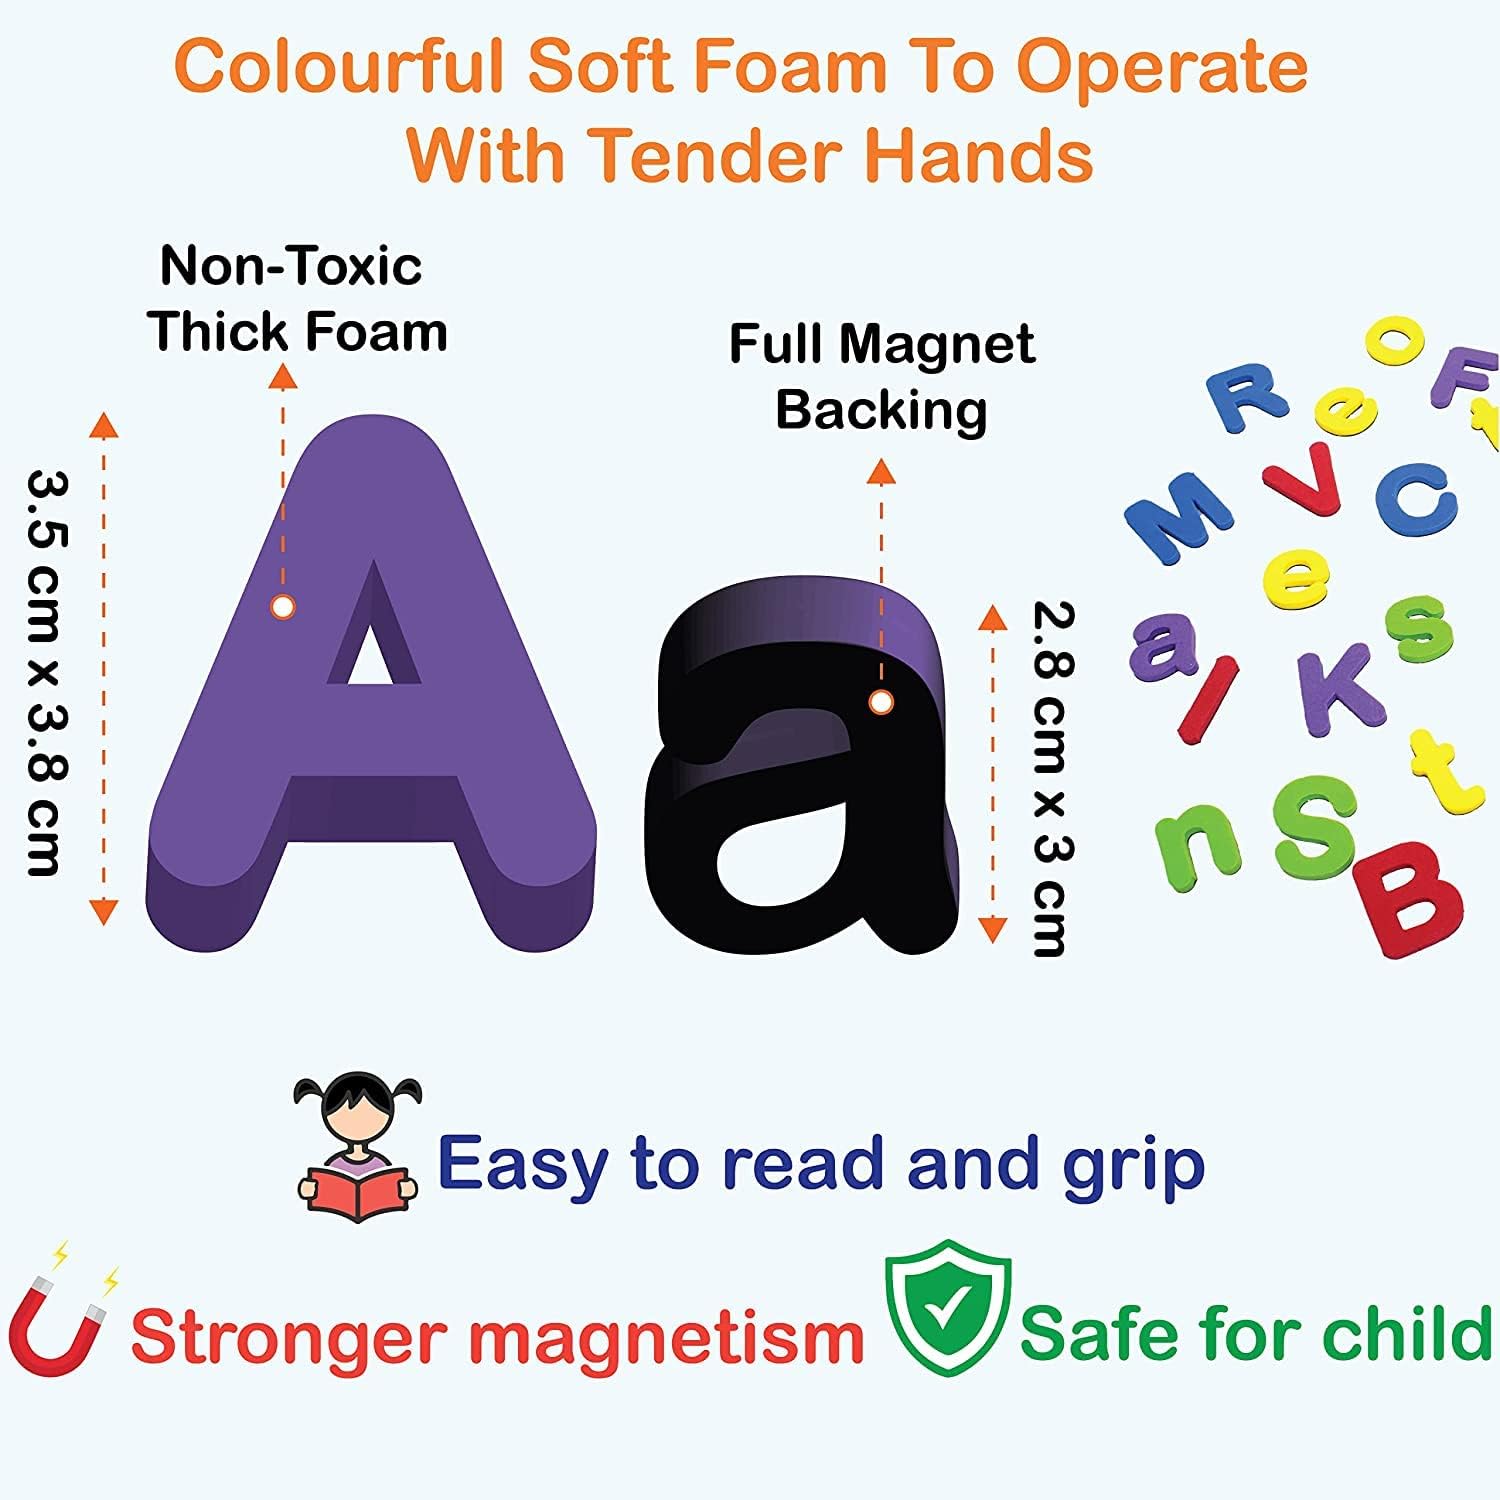 Butterfly EduFields Magnetic Alphabets And Numbers, 143 Letter Magnets Words With 50 Pictures, Magnetic Board & Spelling Guide | 5 Color Soft Foam Learning Educational Toys For Kids 3 4 5 Years